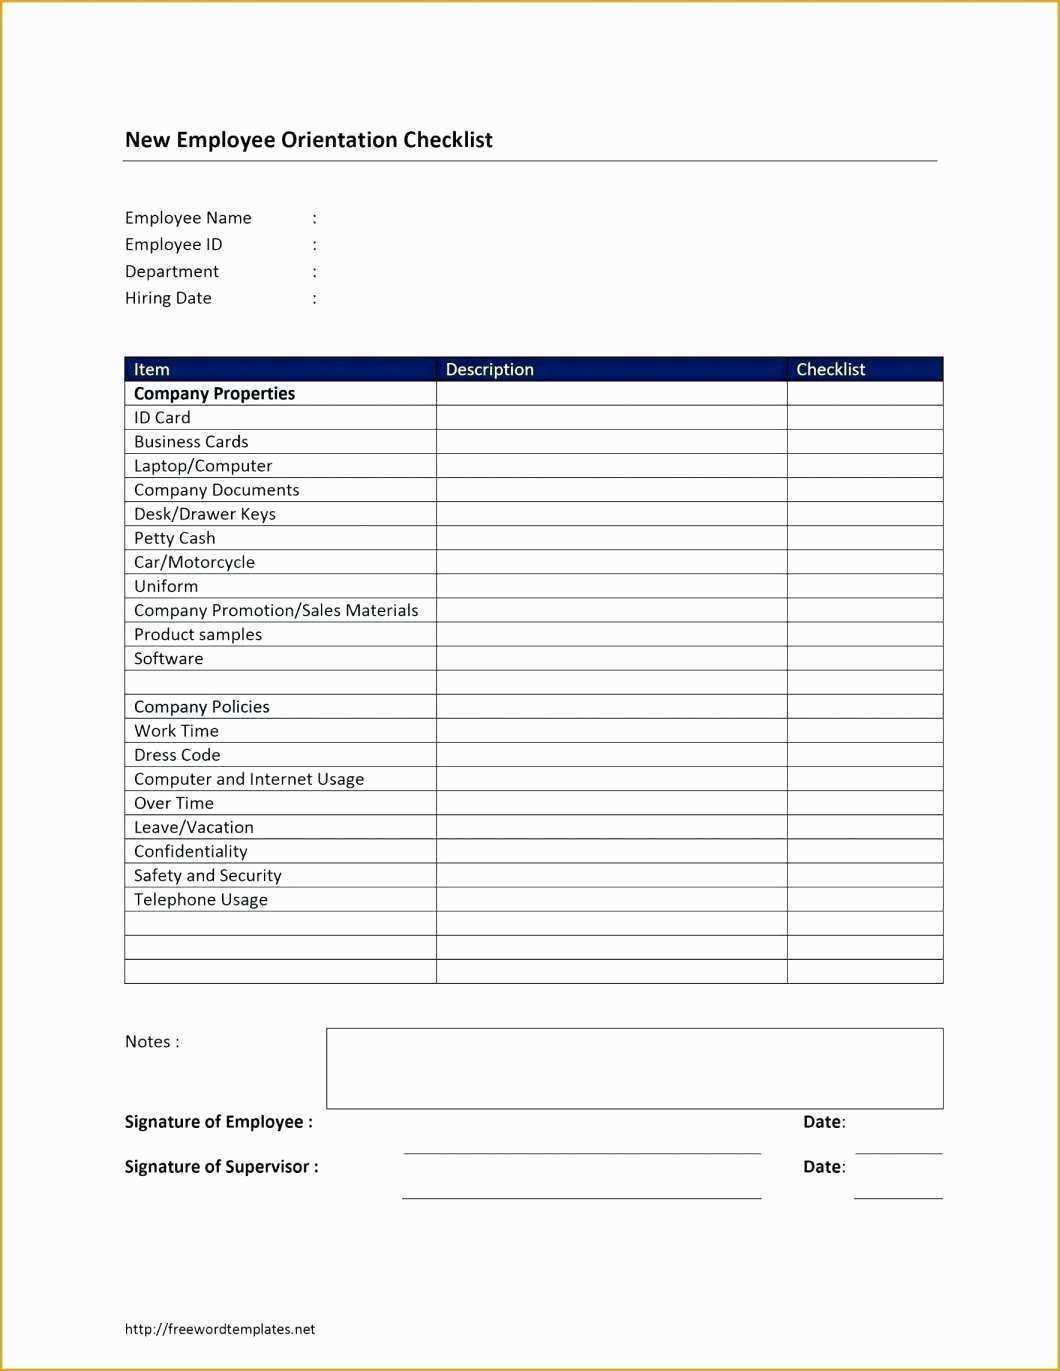 Report Card Template Data Progress Reports Ontario In Blank Report Card Template